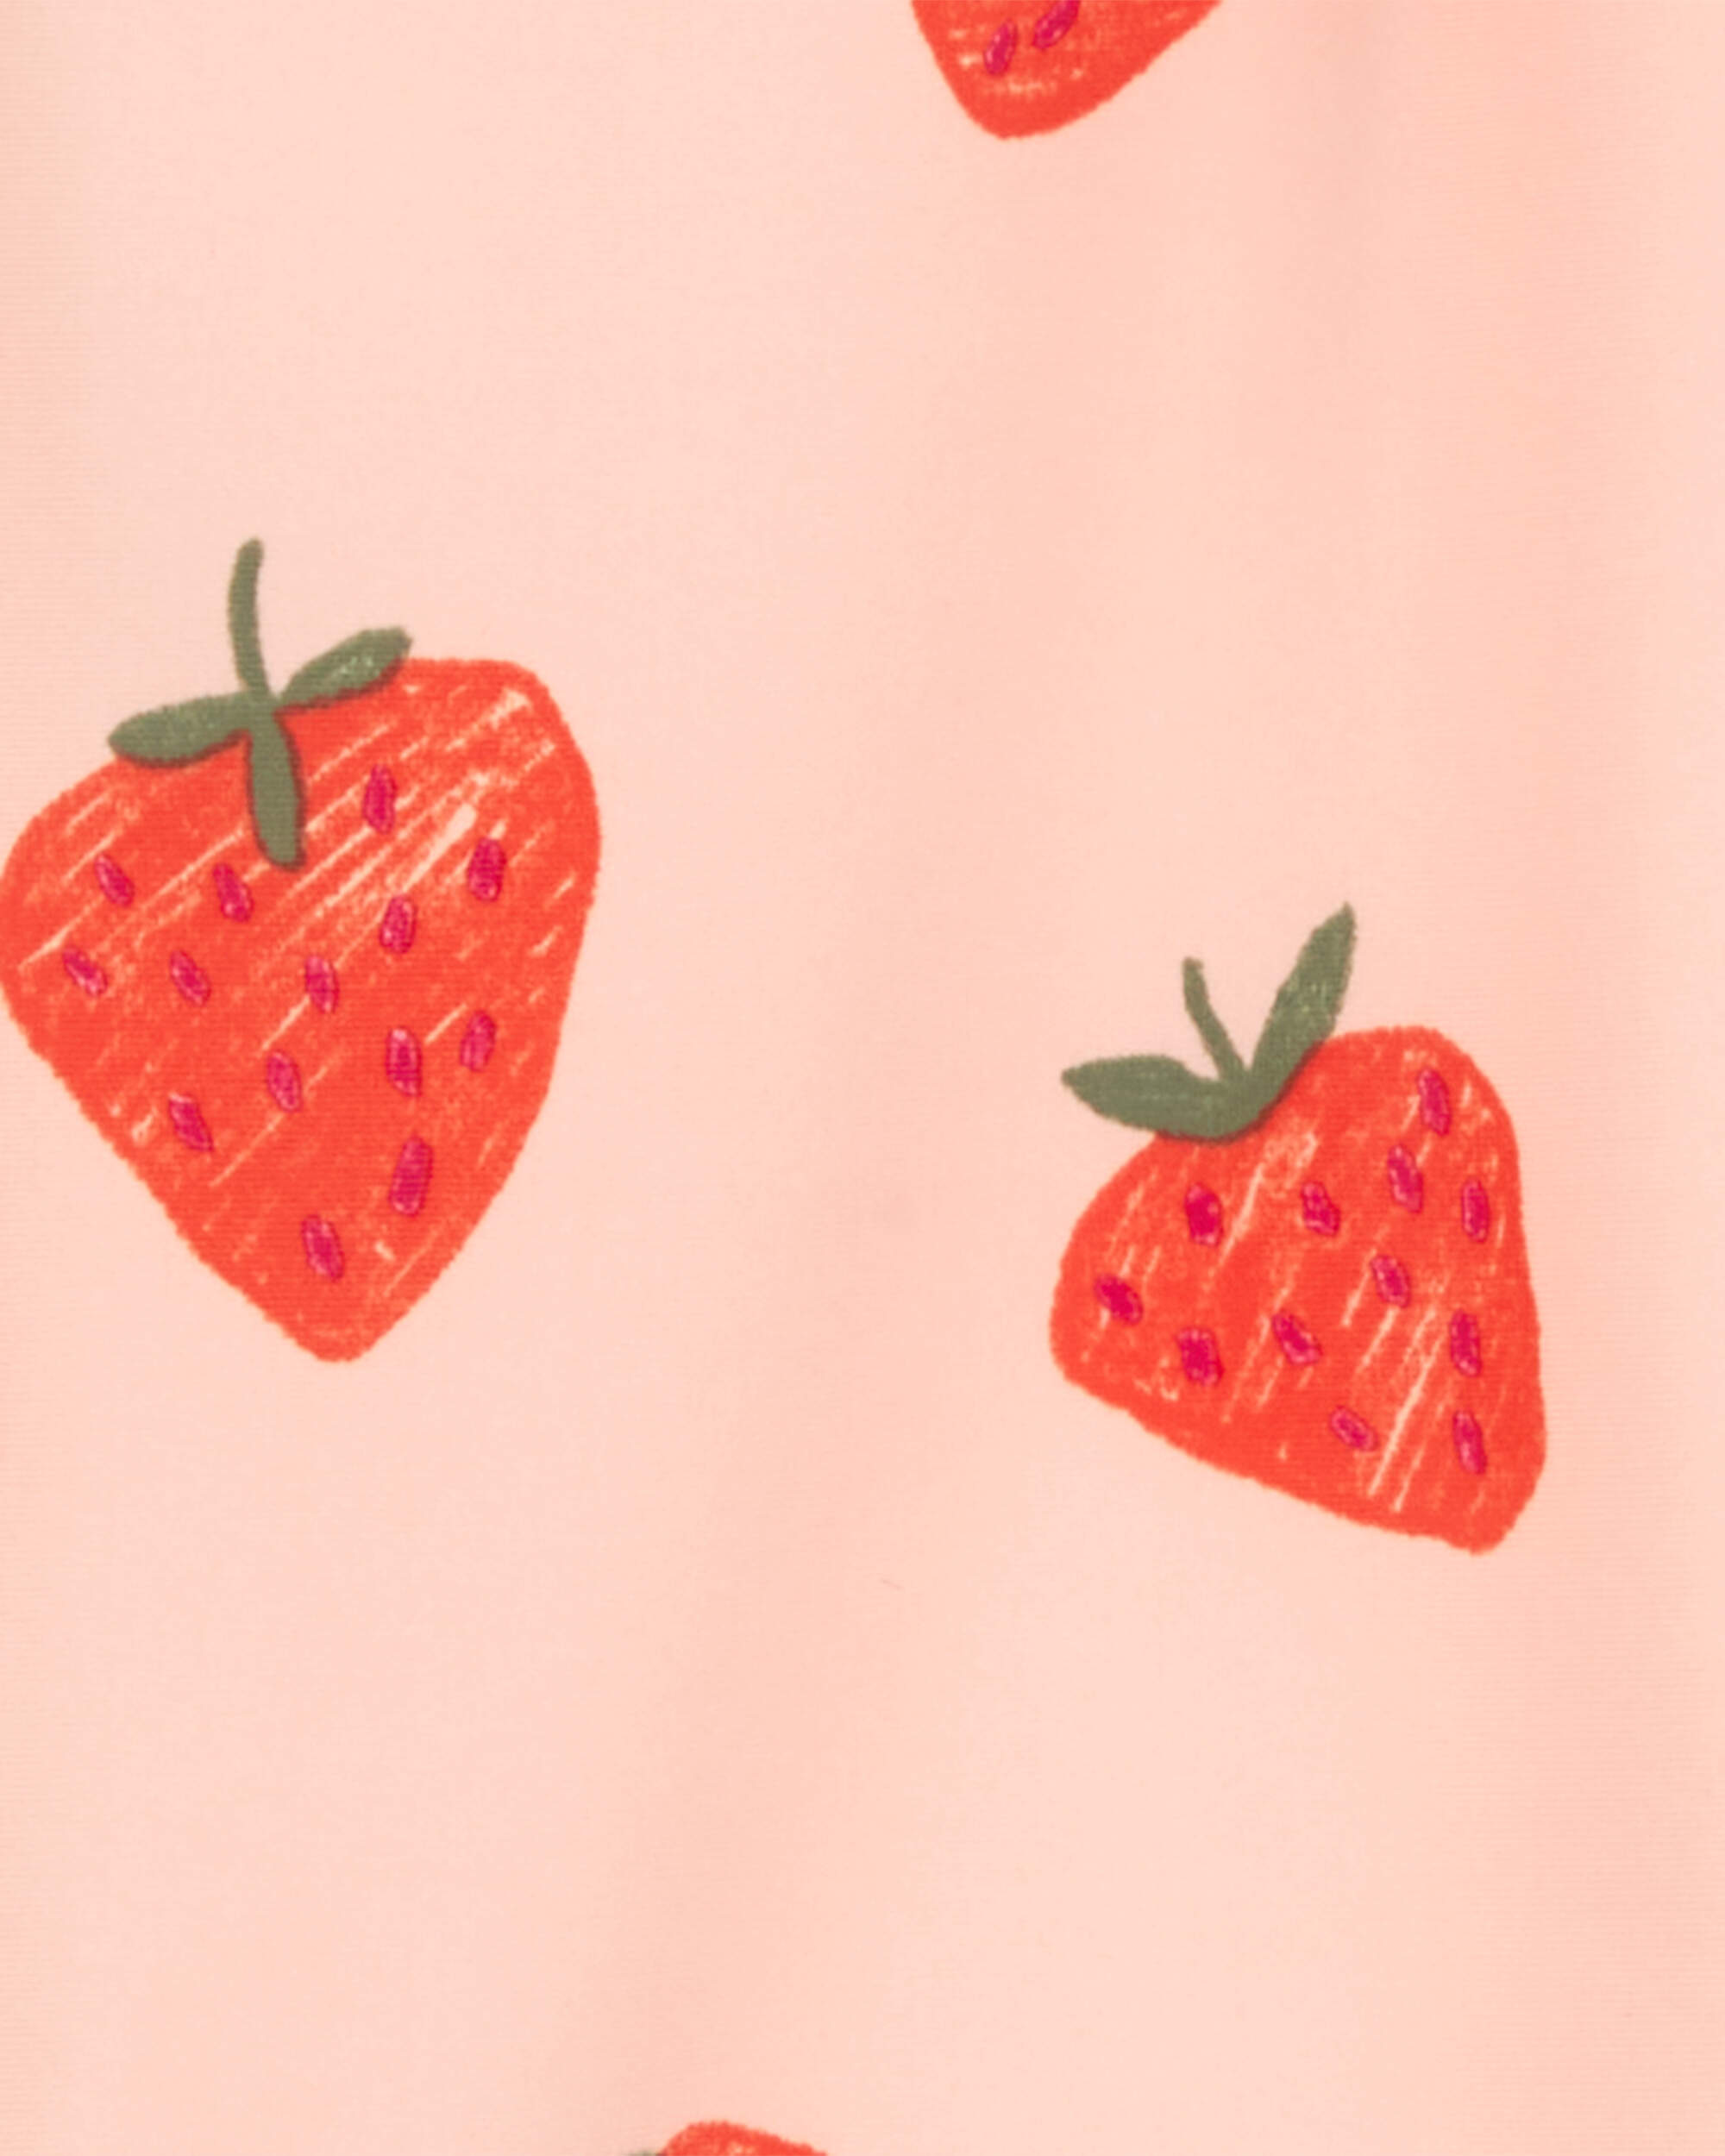 Toddler Strawberry 1-Piece Swimsuit